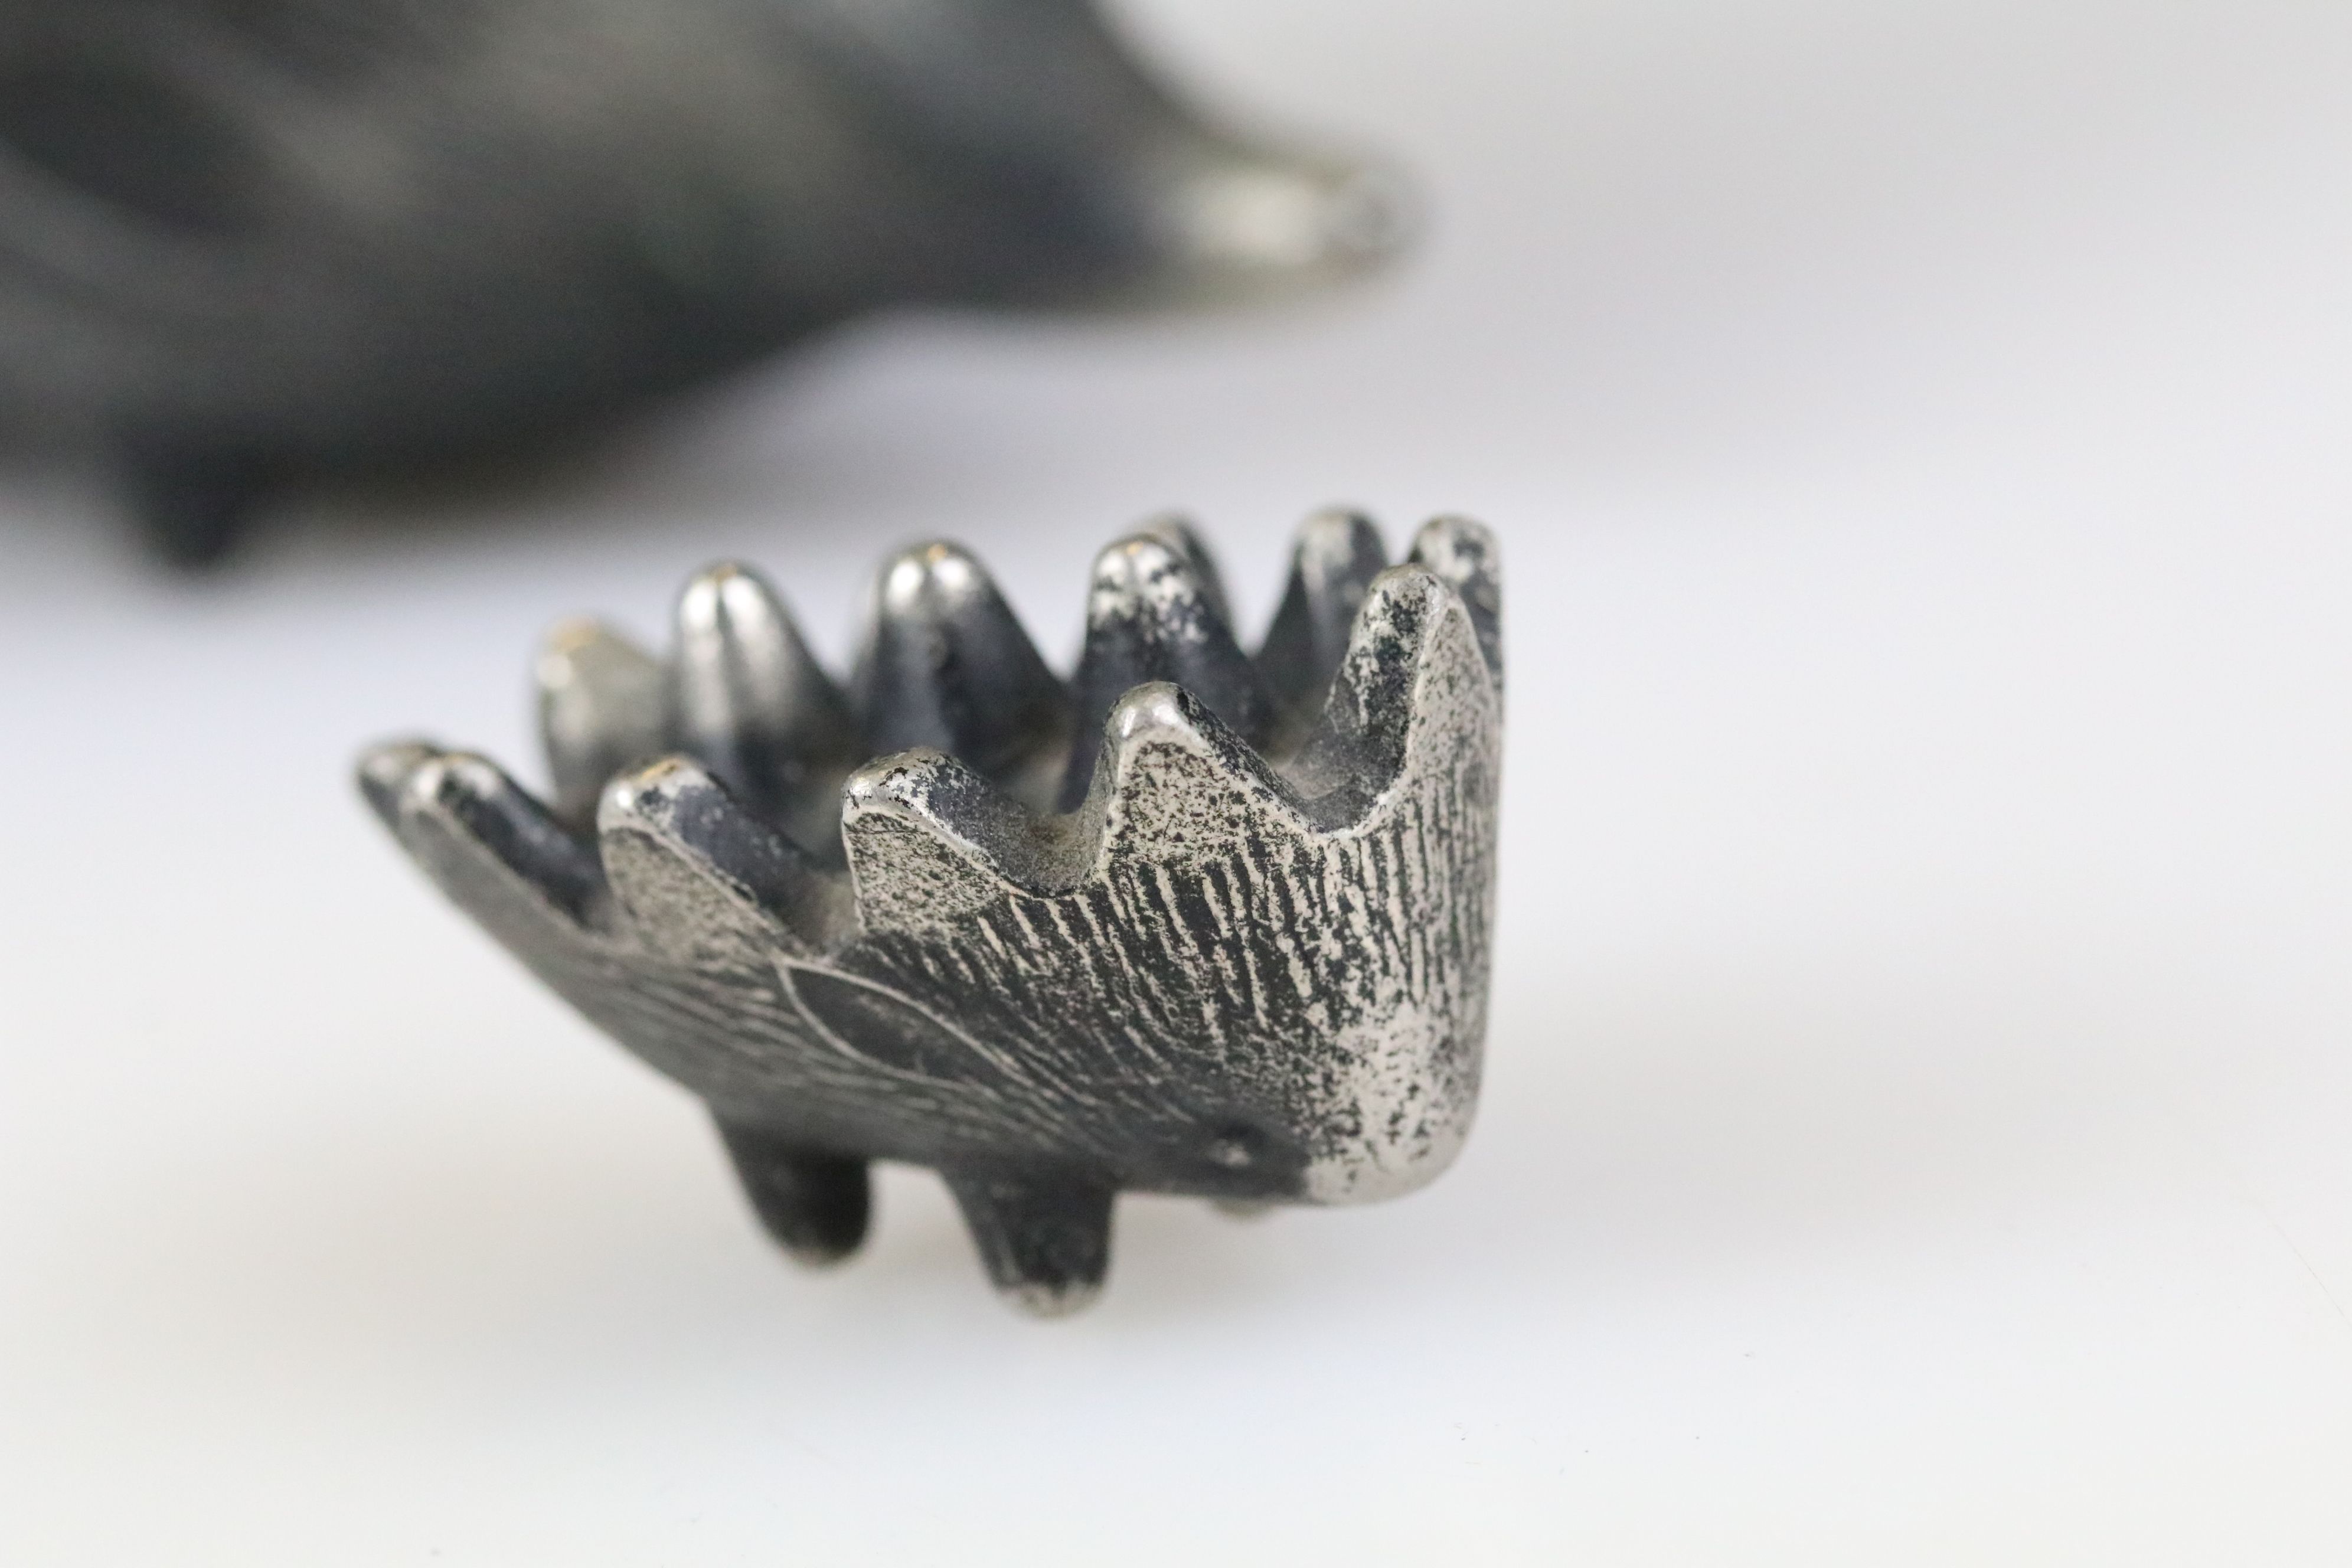 Metal hedgehog ashtray, each layer lifting to reveal a smaller hedgehog. Measures approx 11cm long - Image 5 of 5